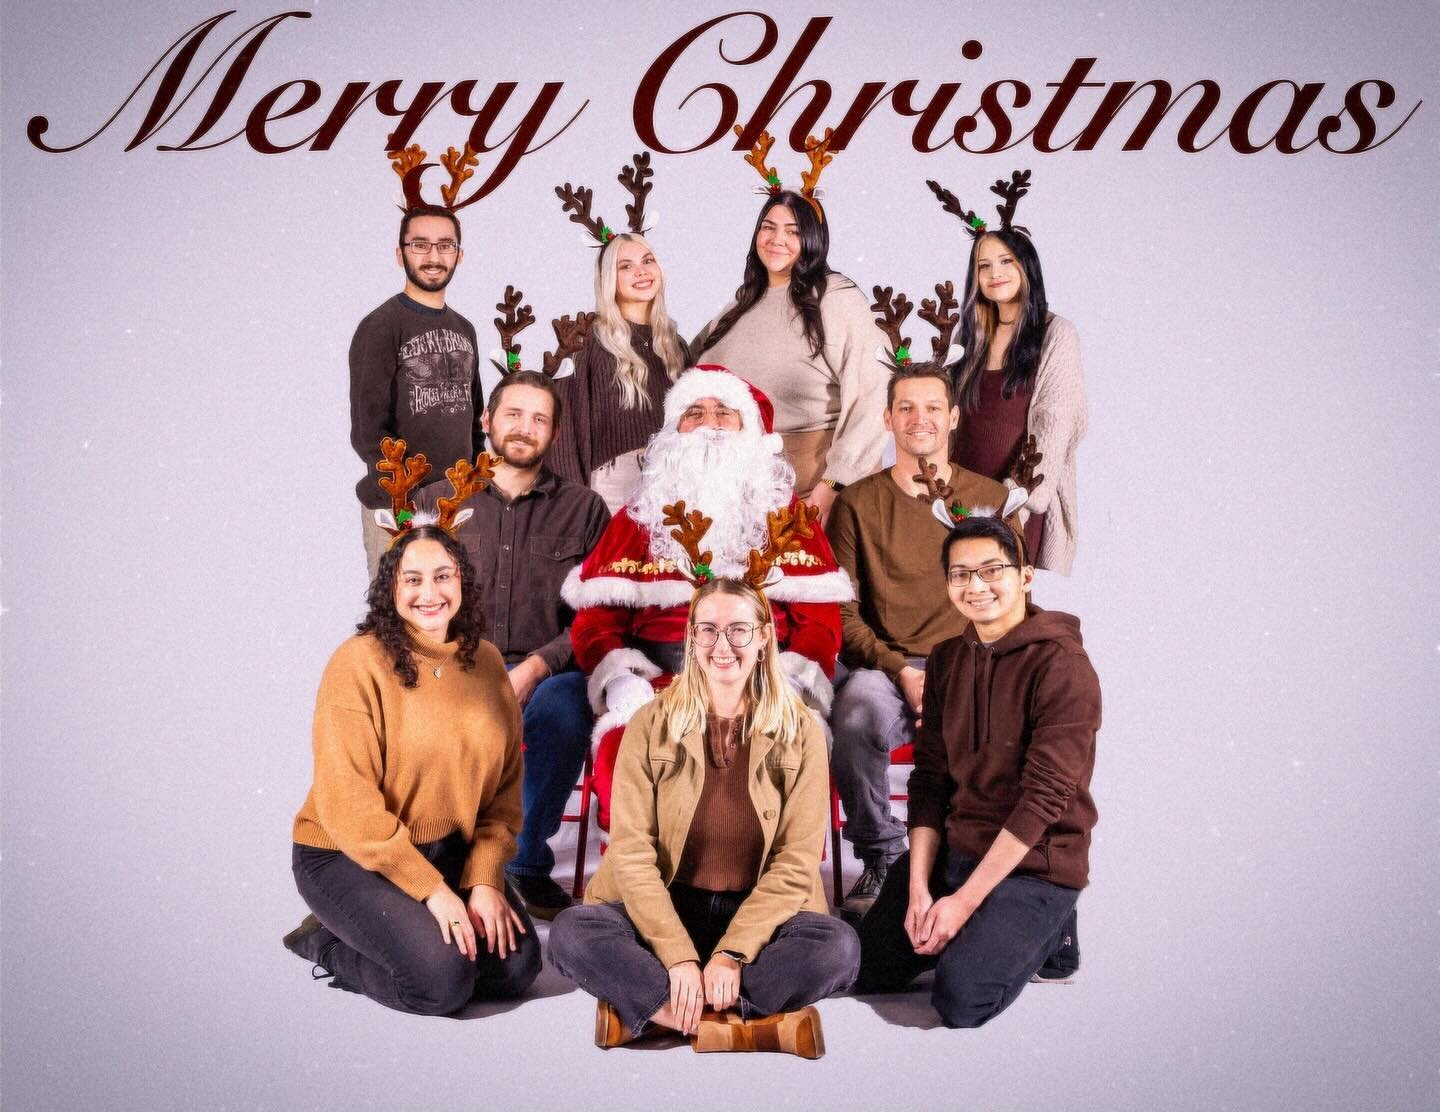 Merry Christmas &amp; Happy Holidays from our team to you and your families!